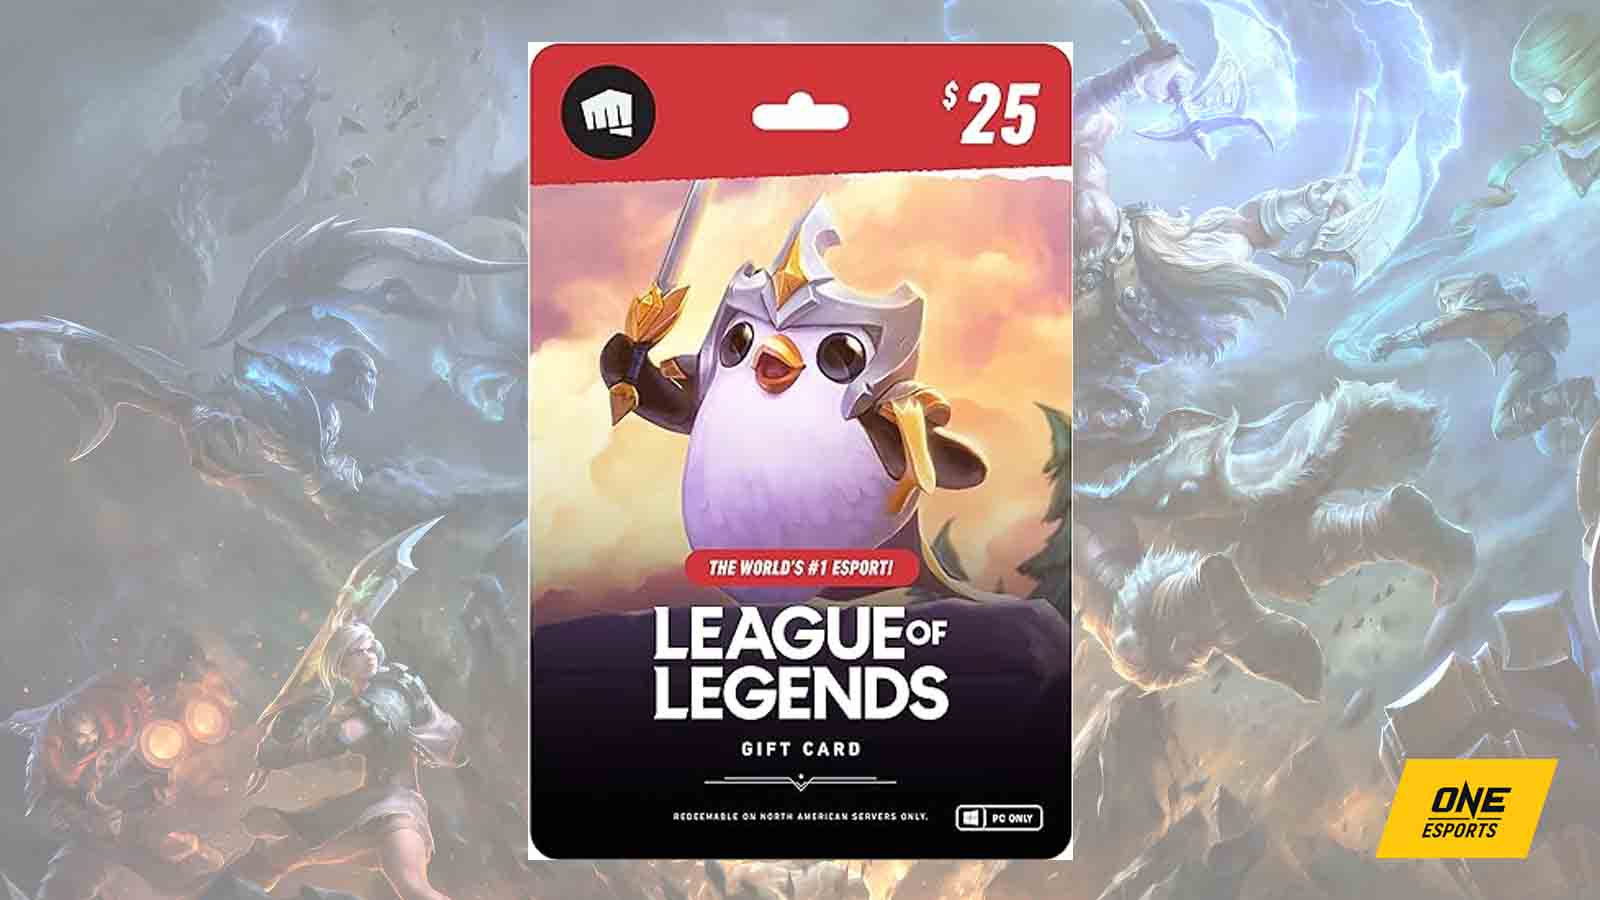 League of Legends US$25 gift card